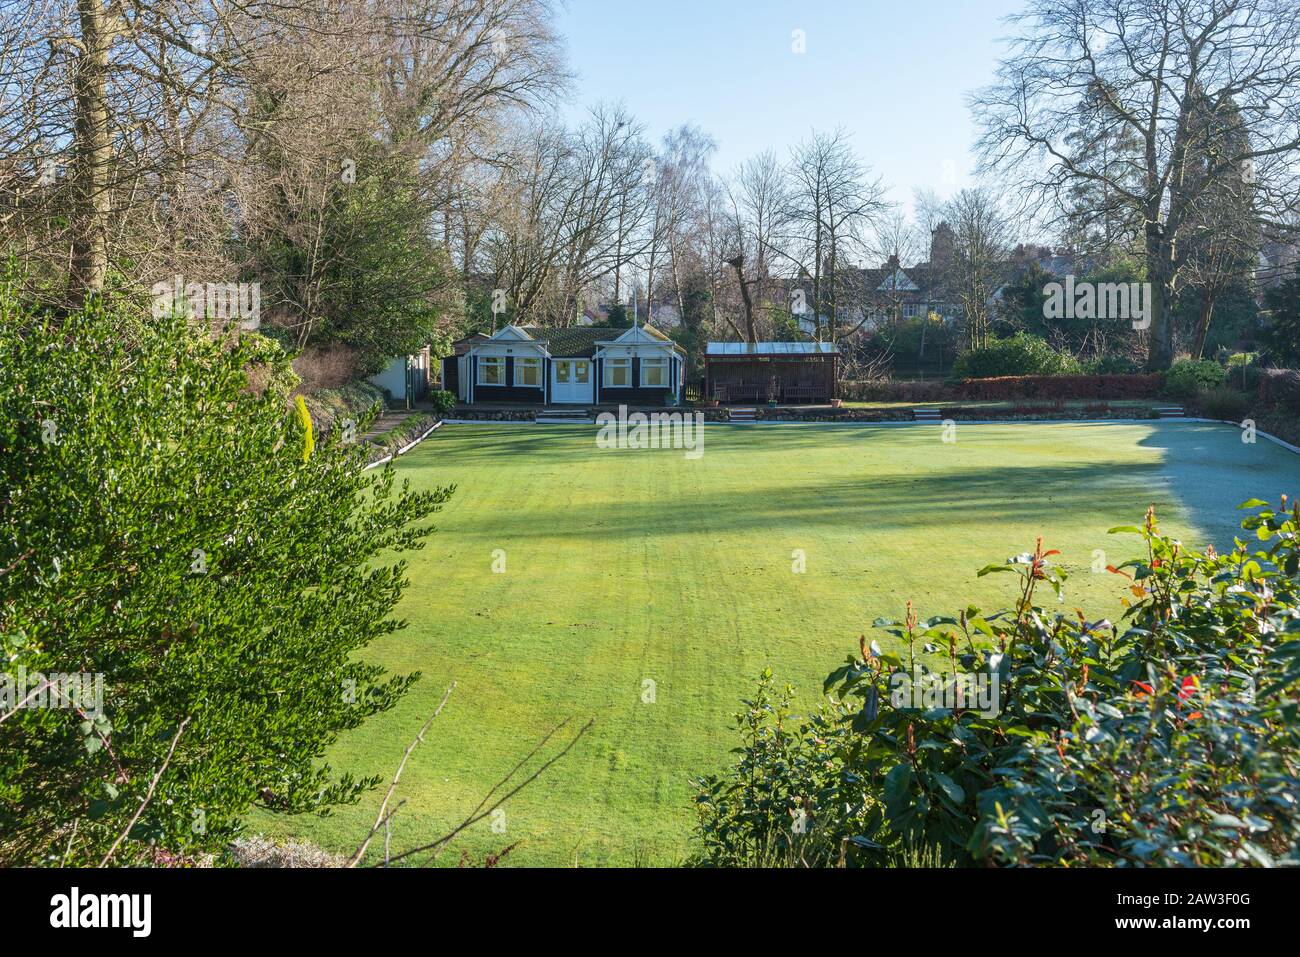 The bowling green and club on the Moor Pool Estate which is a garden suburb in Harborne, Birmingham and is a conservation area. Stock Photo